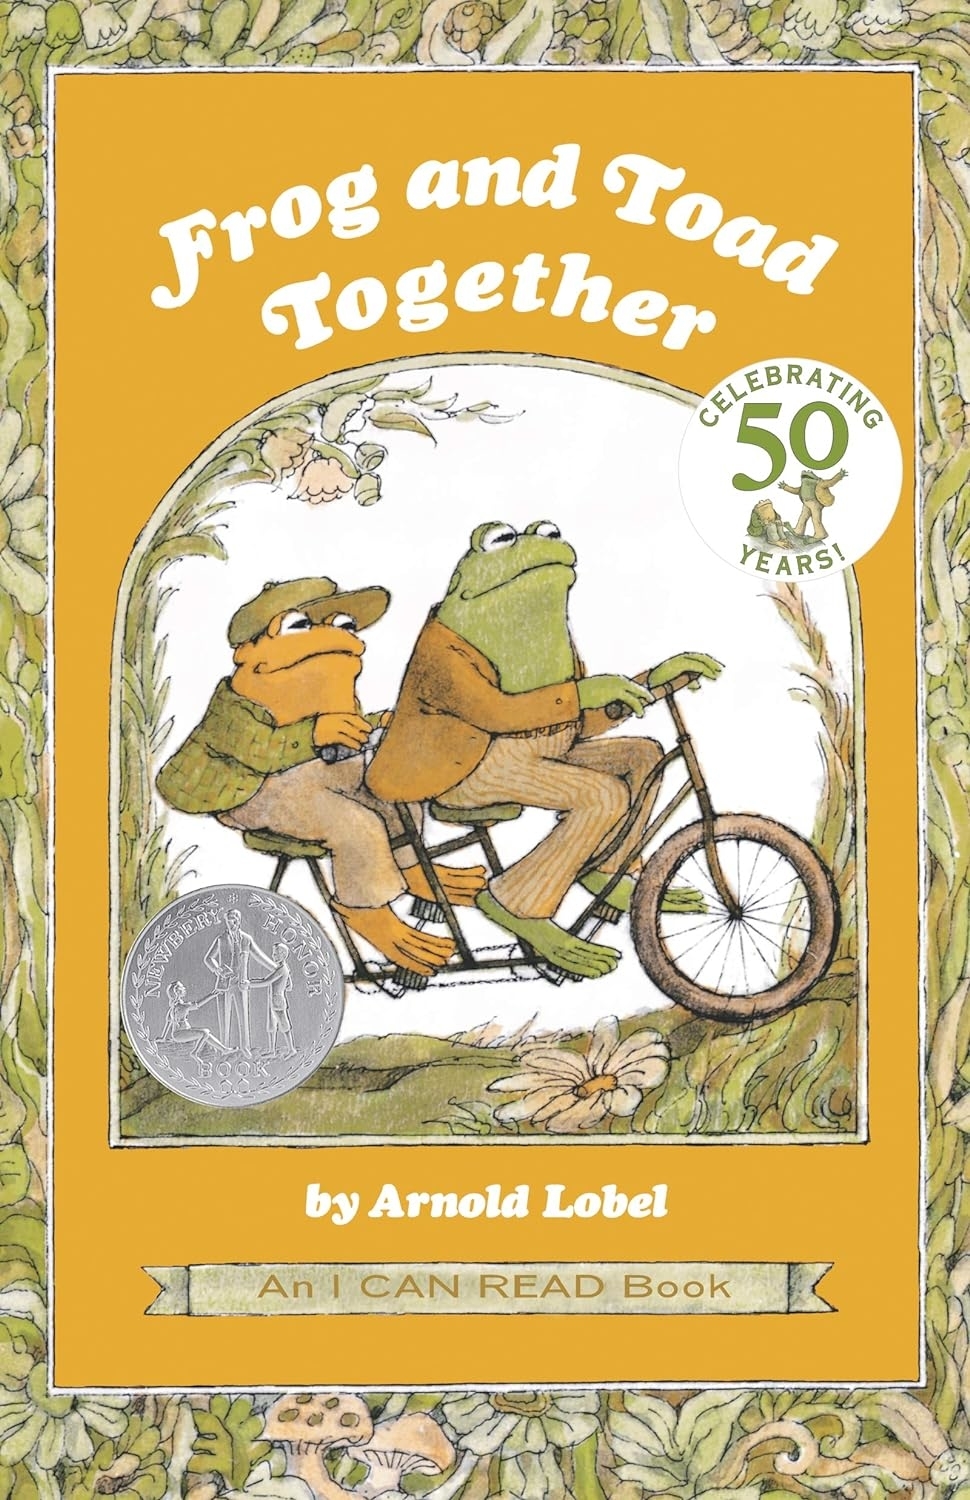 Cover of &quot;Frog and Toad Together&quot; book, showing the characters Frog and Toad on a bicycle, celebrating 50 years